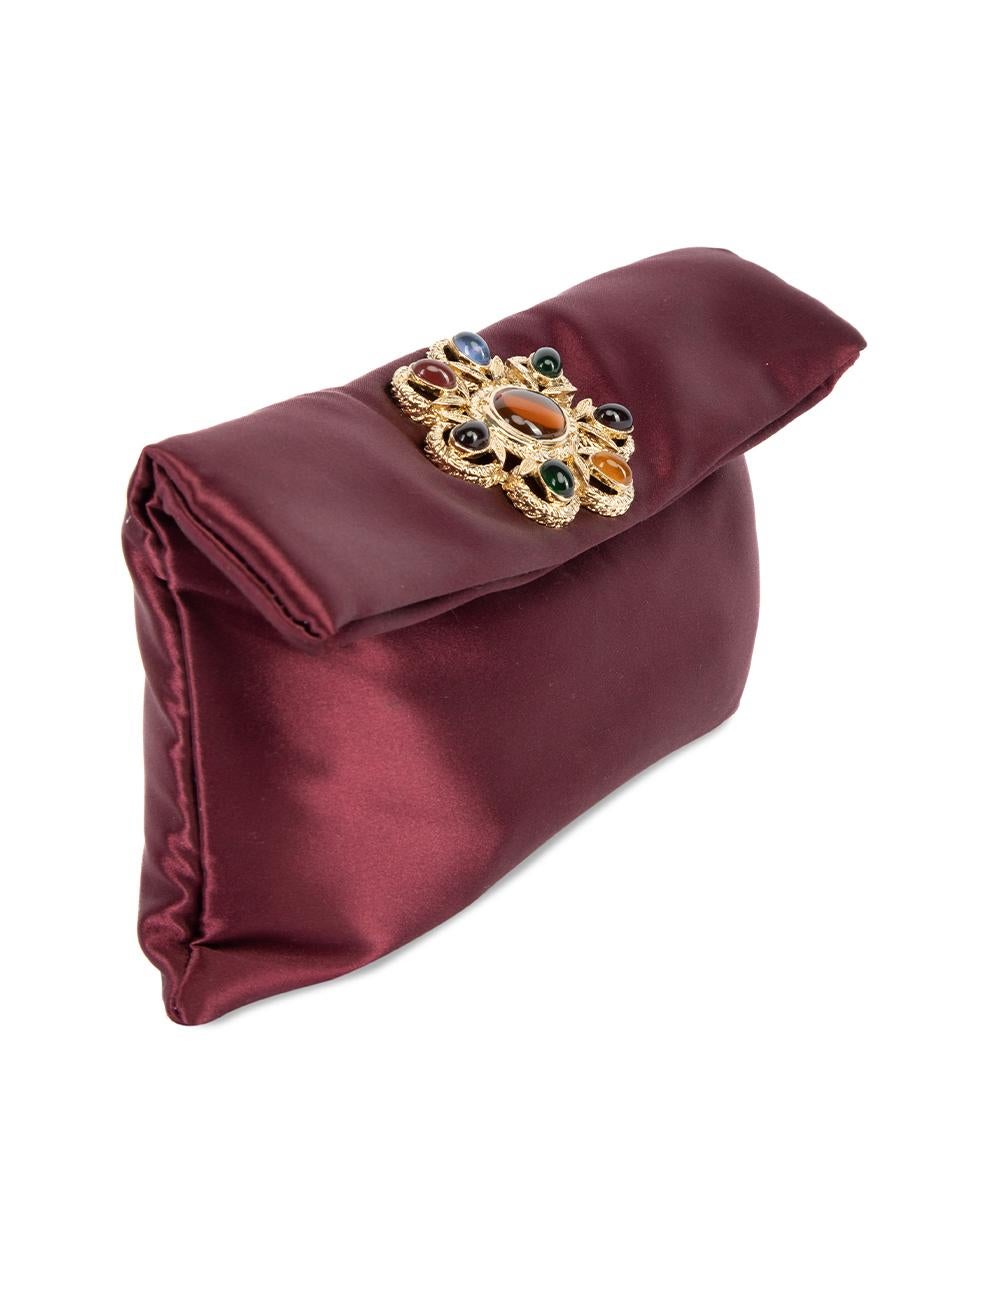 CONDITION is Very good. Hardly any visible wear to clutch is evident, minimal scratch can be seen on the exterior gold metal logo on this used Love Moschino designer resale item. Details Burgundy Satin Rectangle clutch Crystal gemstone embellishment